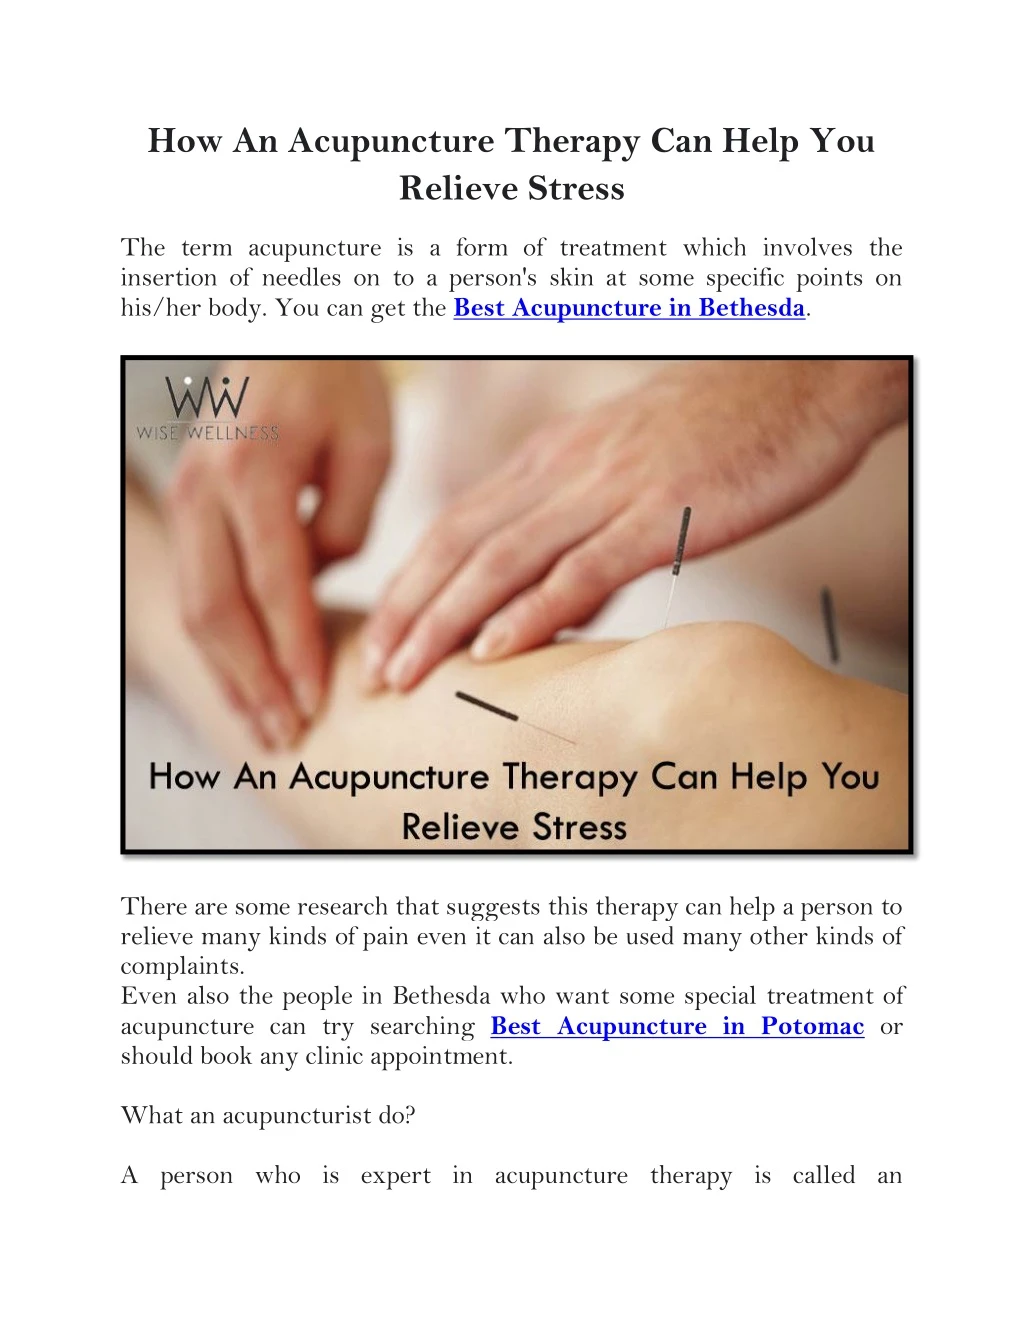 how an acupuncture therapy can help you relieve